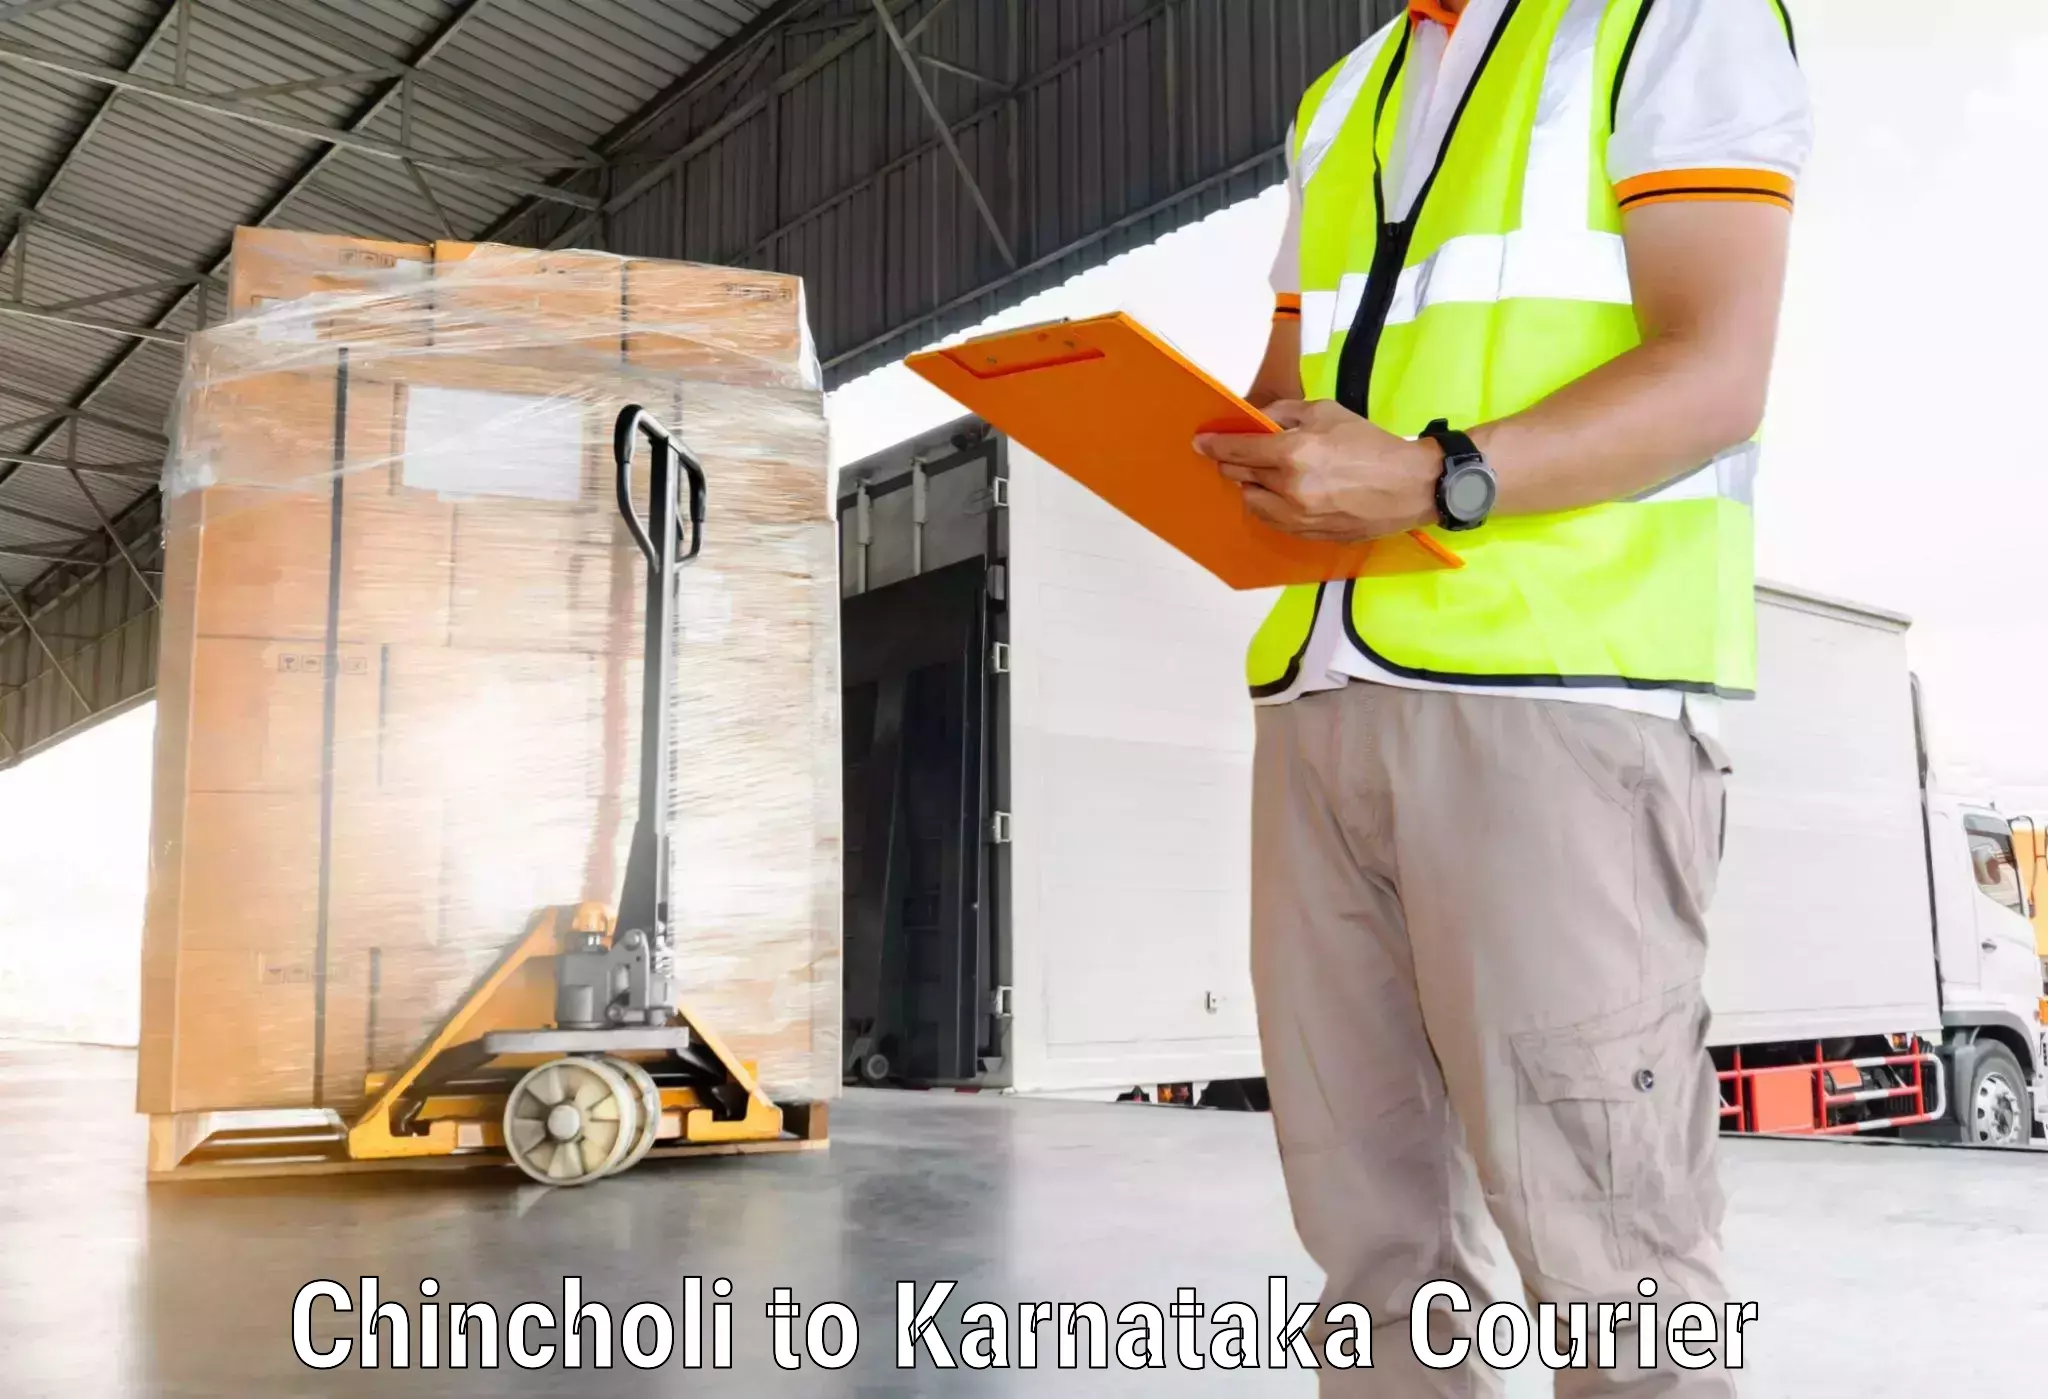 Global courier networks Chincholi to Mangalore